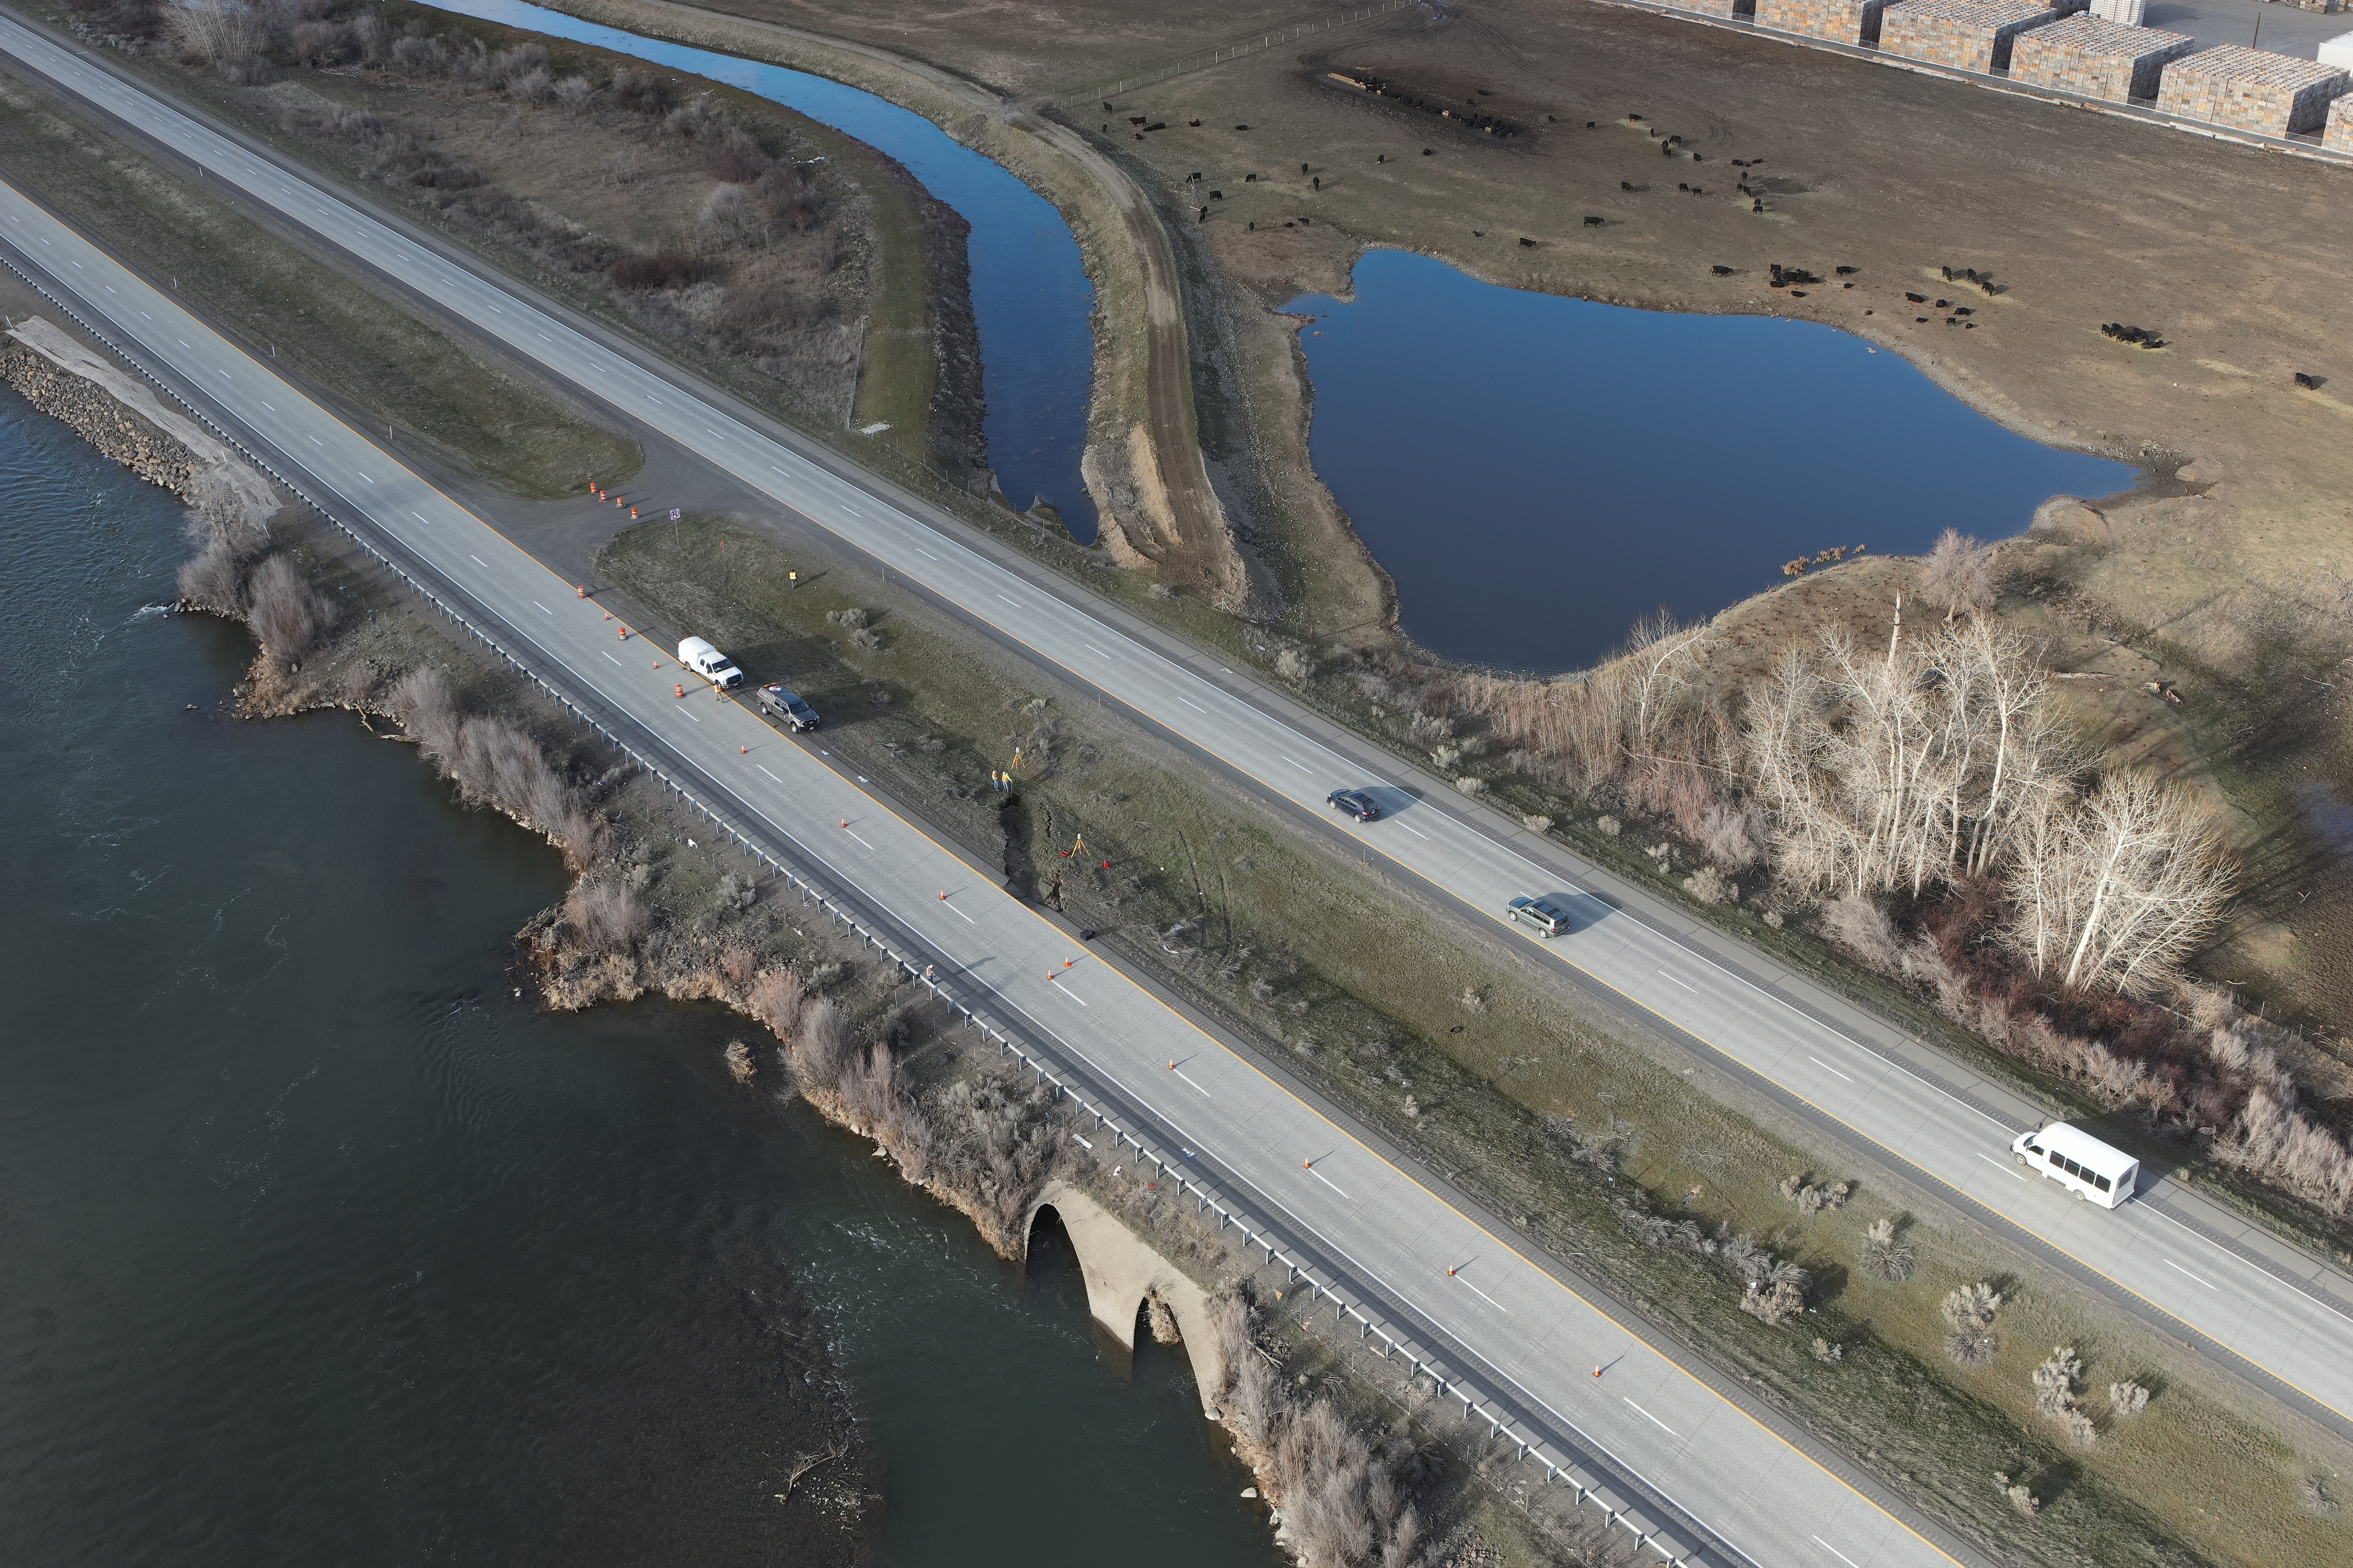 An aerial view of where the embankment failed under eastbound I-82 near Wapato. This was taken hours after it was discovered with the eastbound lanes closed.